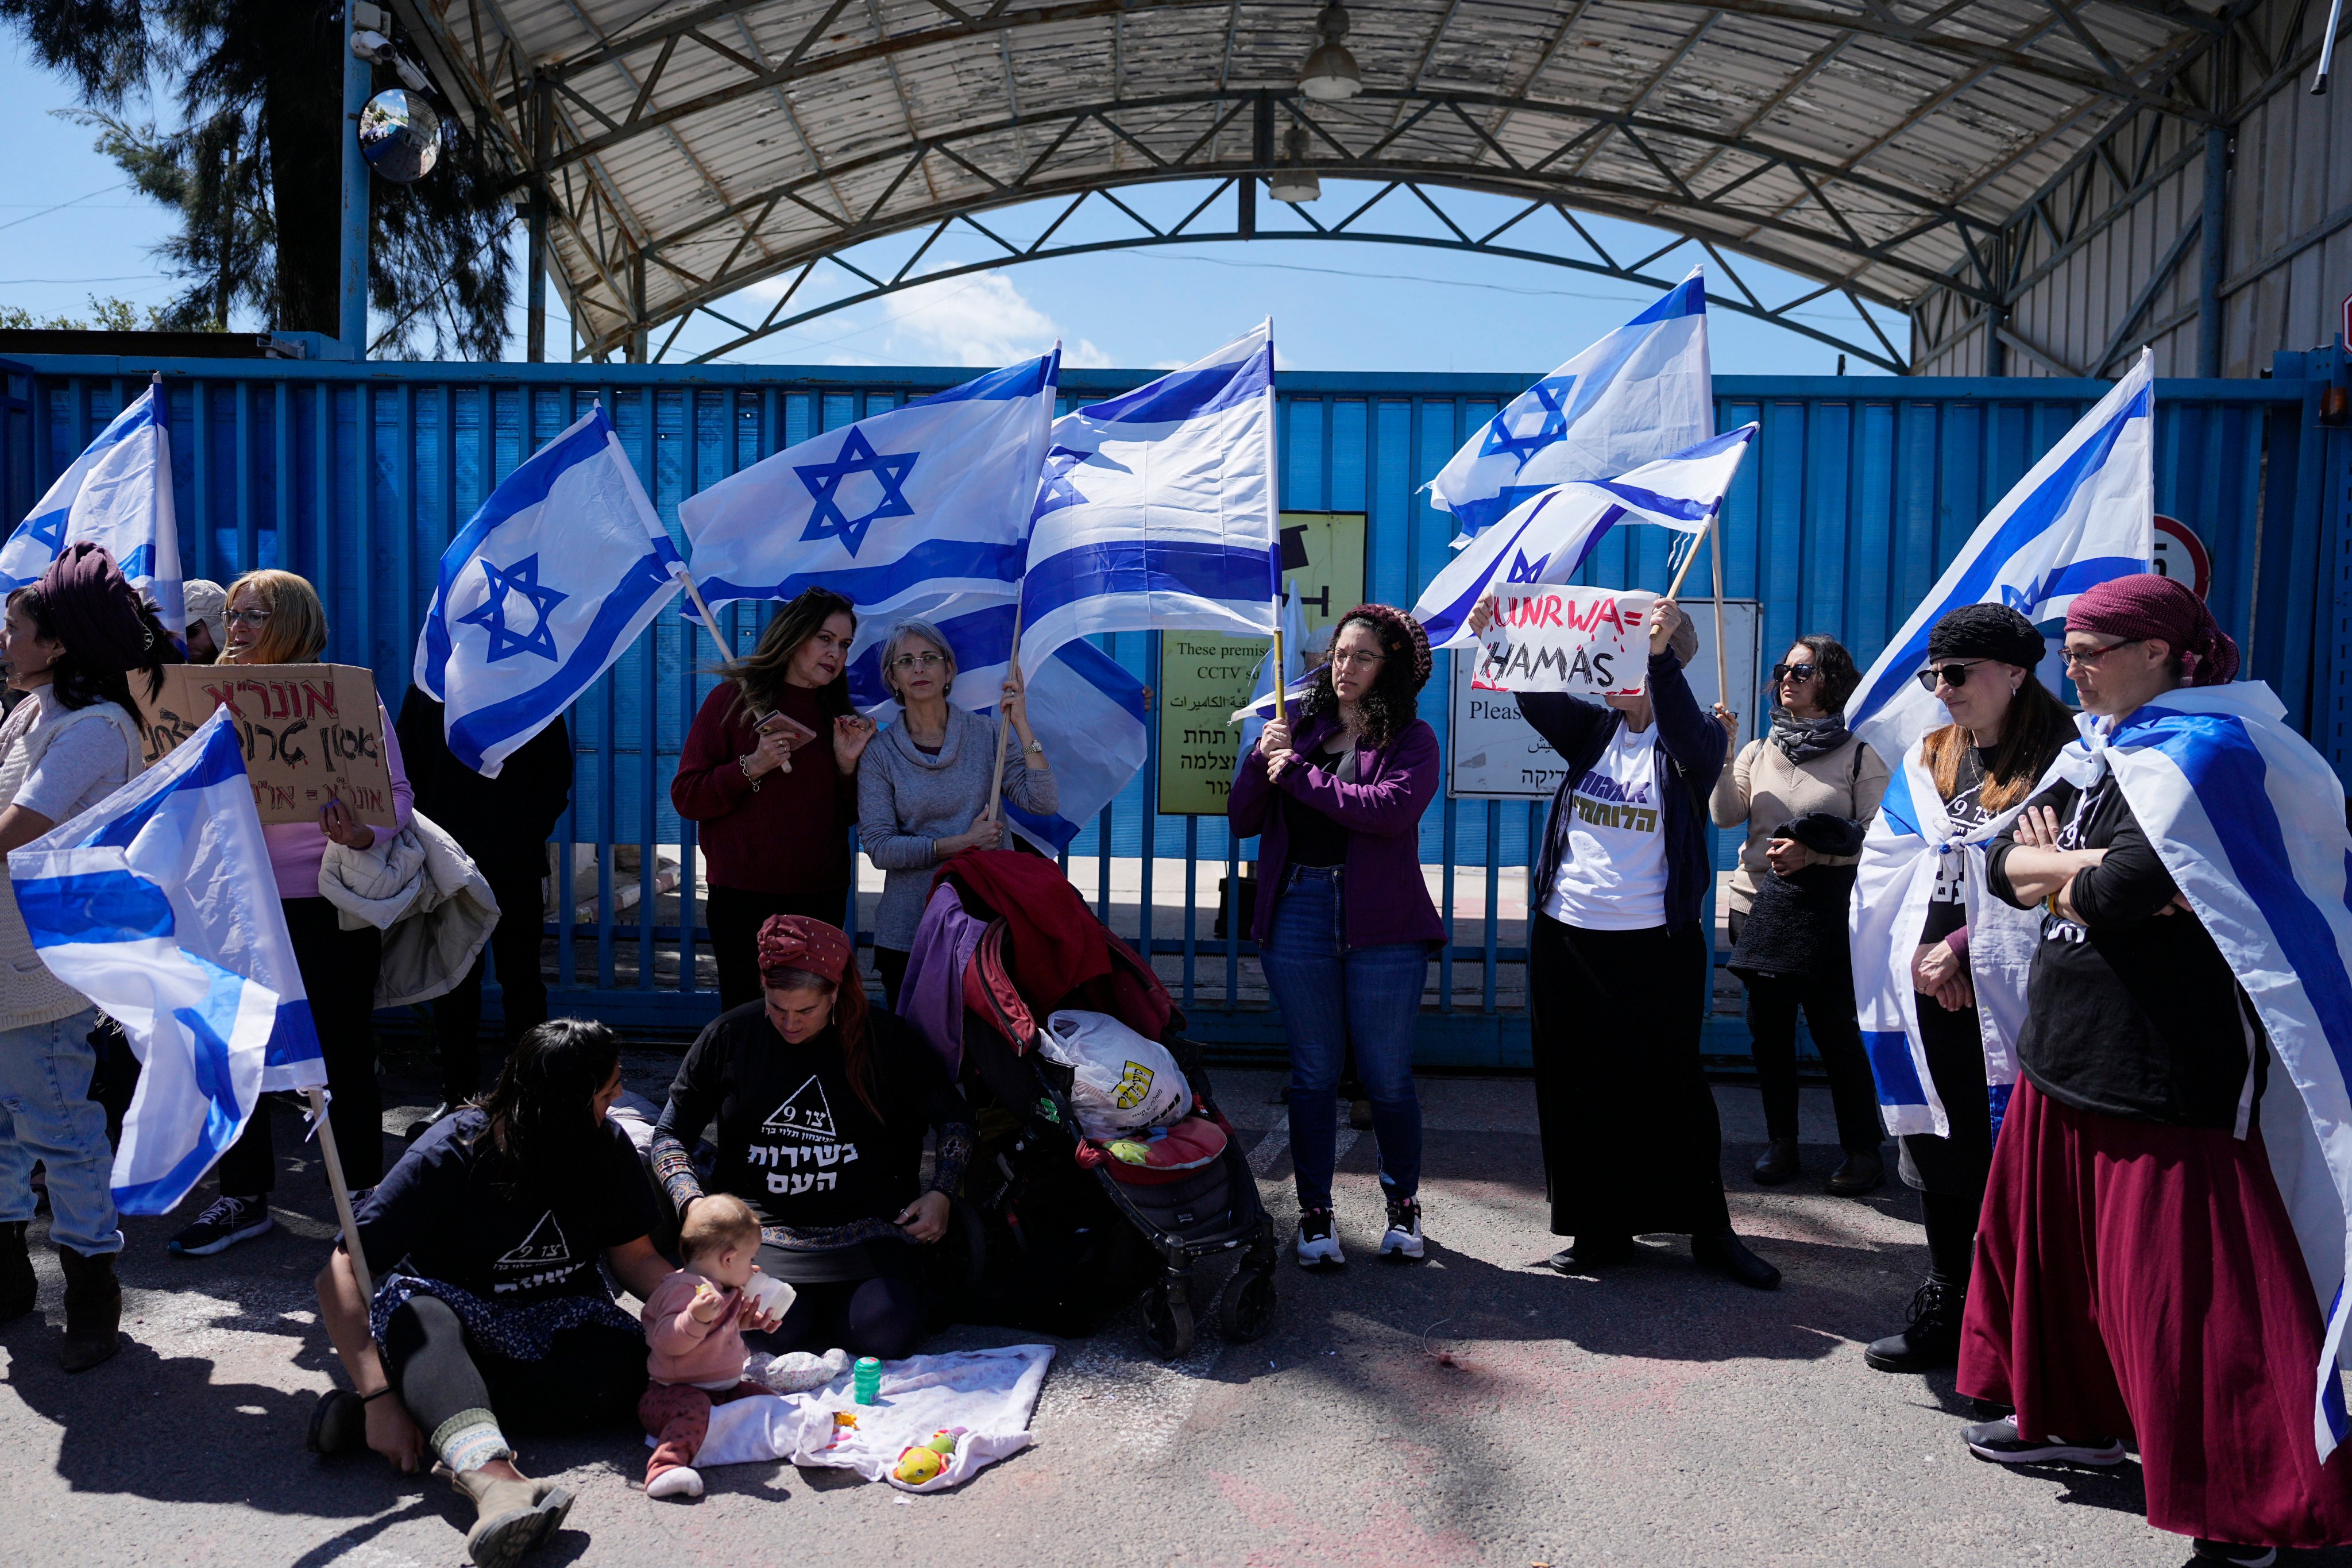 Israelis block the entrance to UNWRA, the main UN agency providing aid in Gaza, during a protest in Jerusalem. Photo: AP 